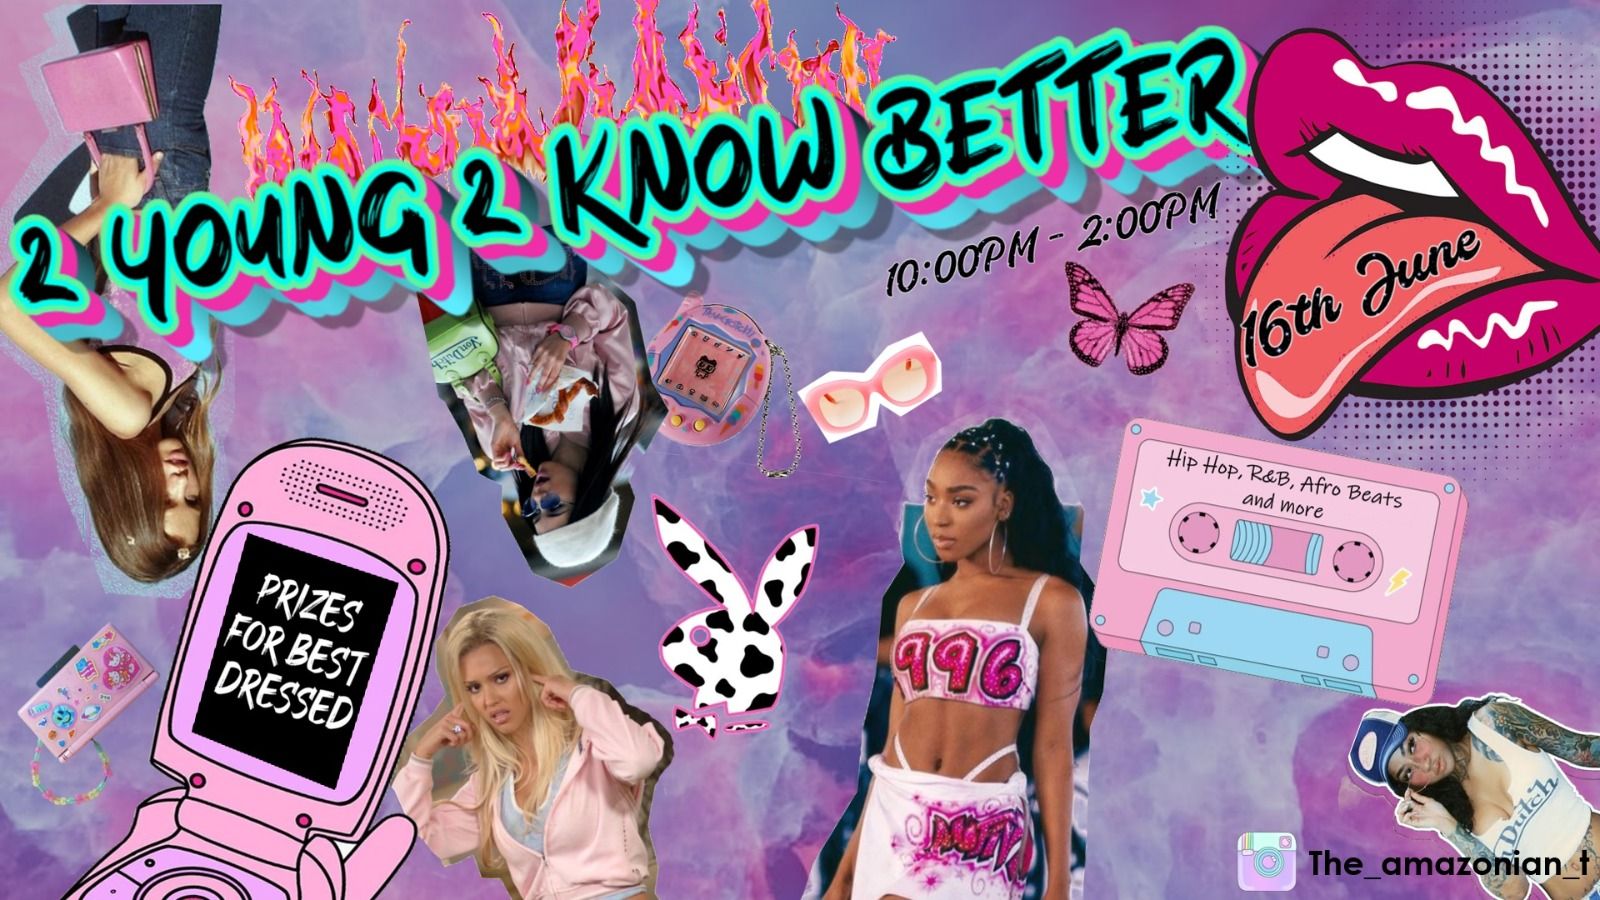 A collage of images including two women, a butterfly, a cassette tape, and a fire with the words 